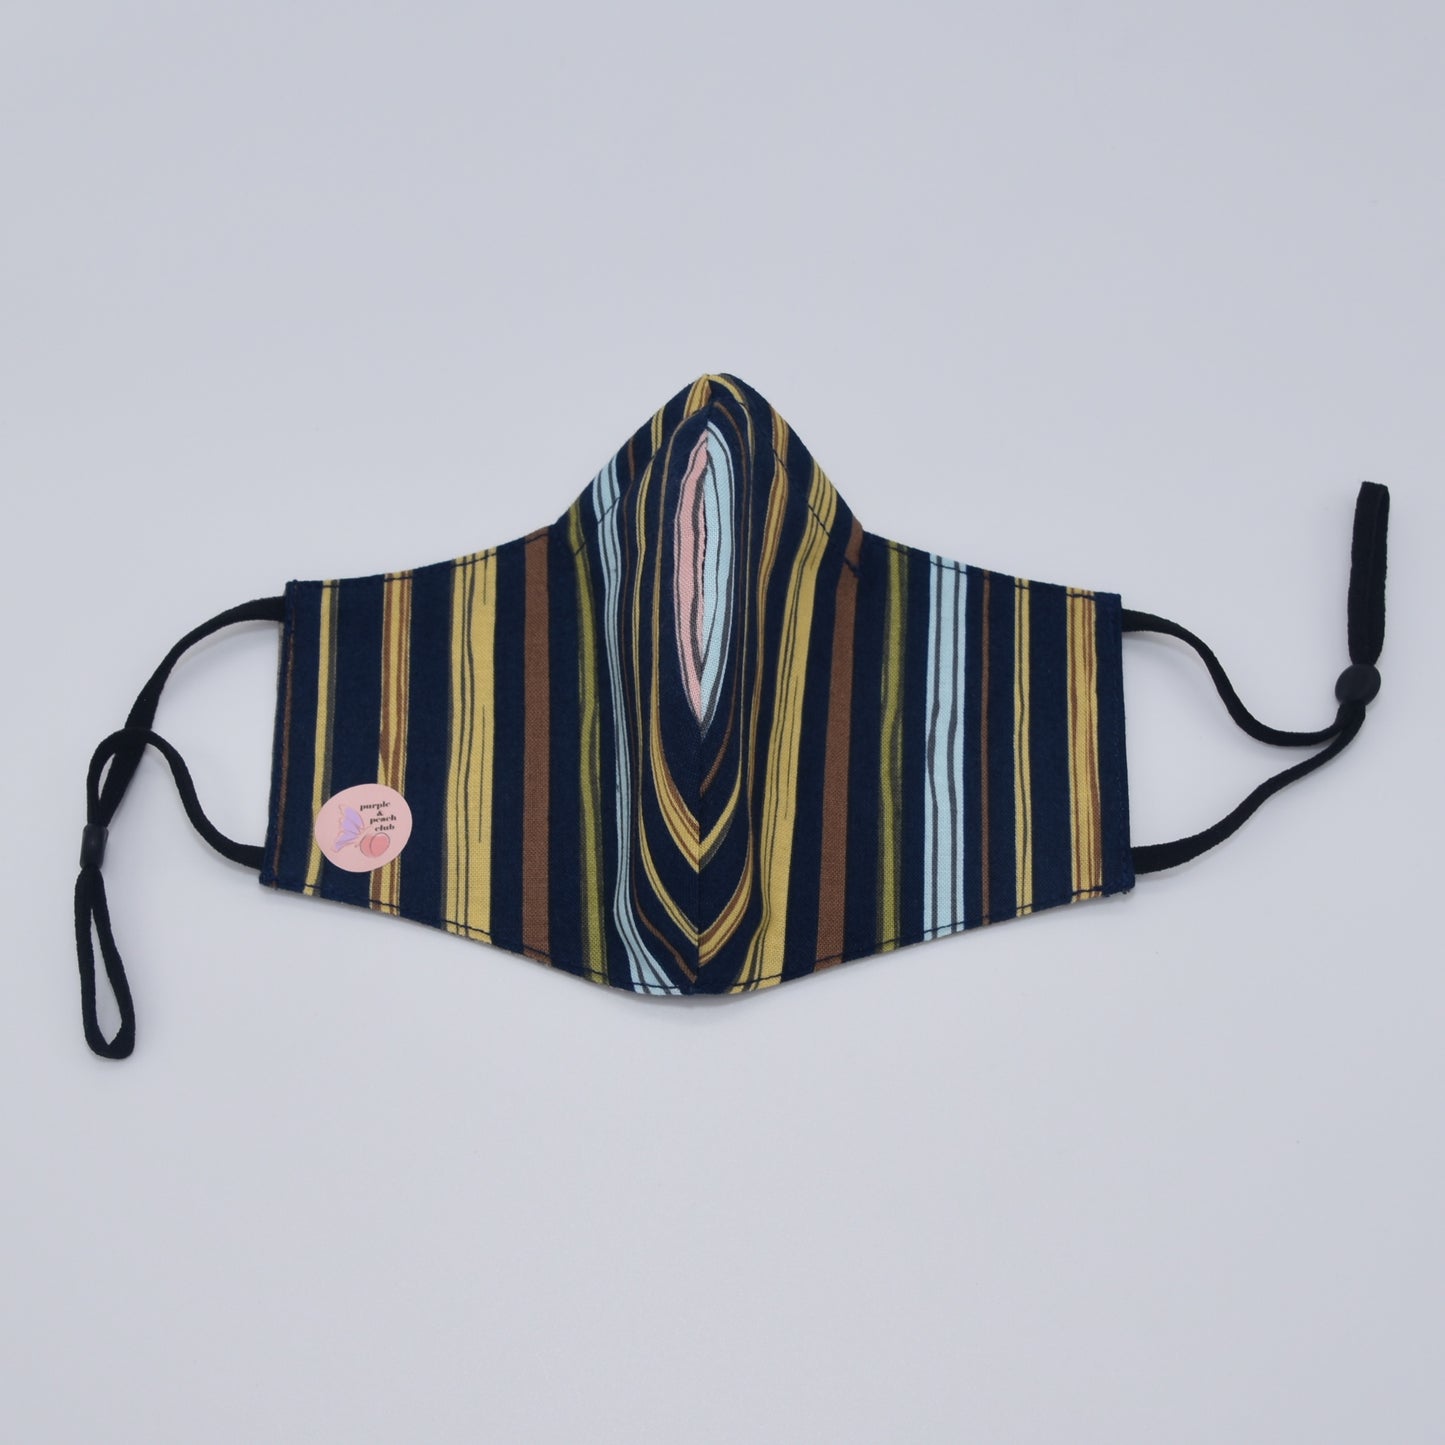 Deep and contrasting colors come together to form a striking look in this exquisite striped cotton mask.  Reversible and double-layered. Built for comfort with an adjustable nose bridge and adjustable ear straps. 